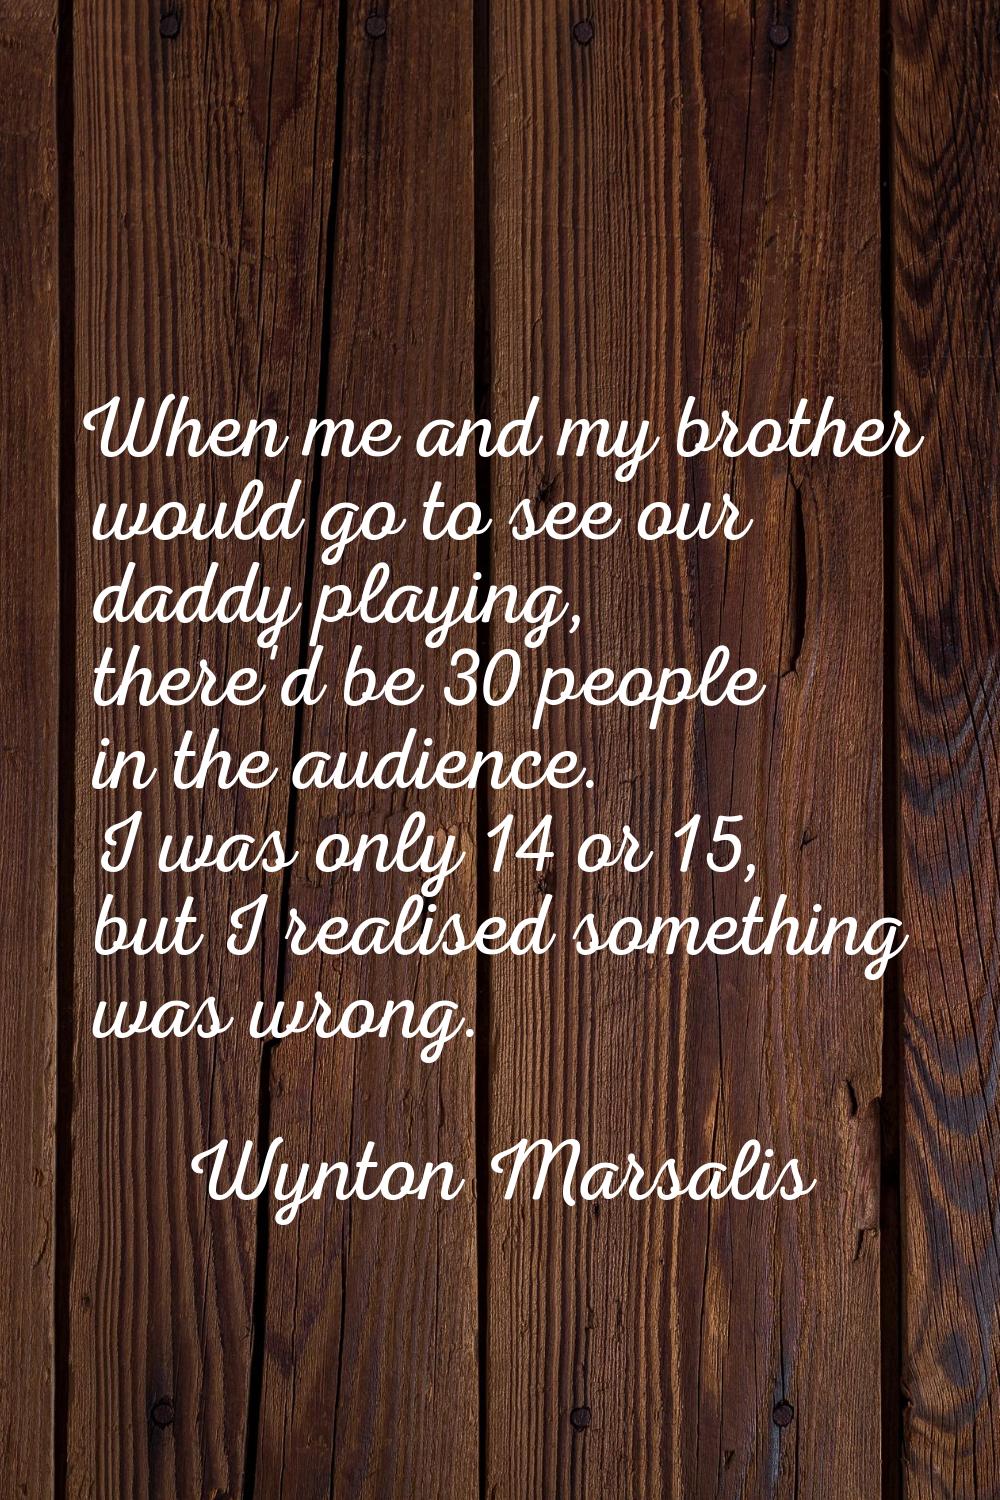 When me and my brother would go to see our daddy playing, there'd be 30 people in the audience. I w